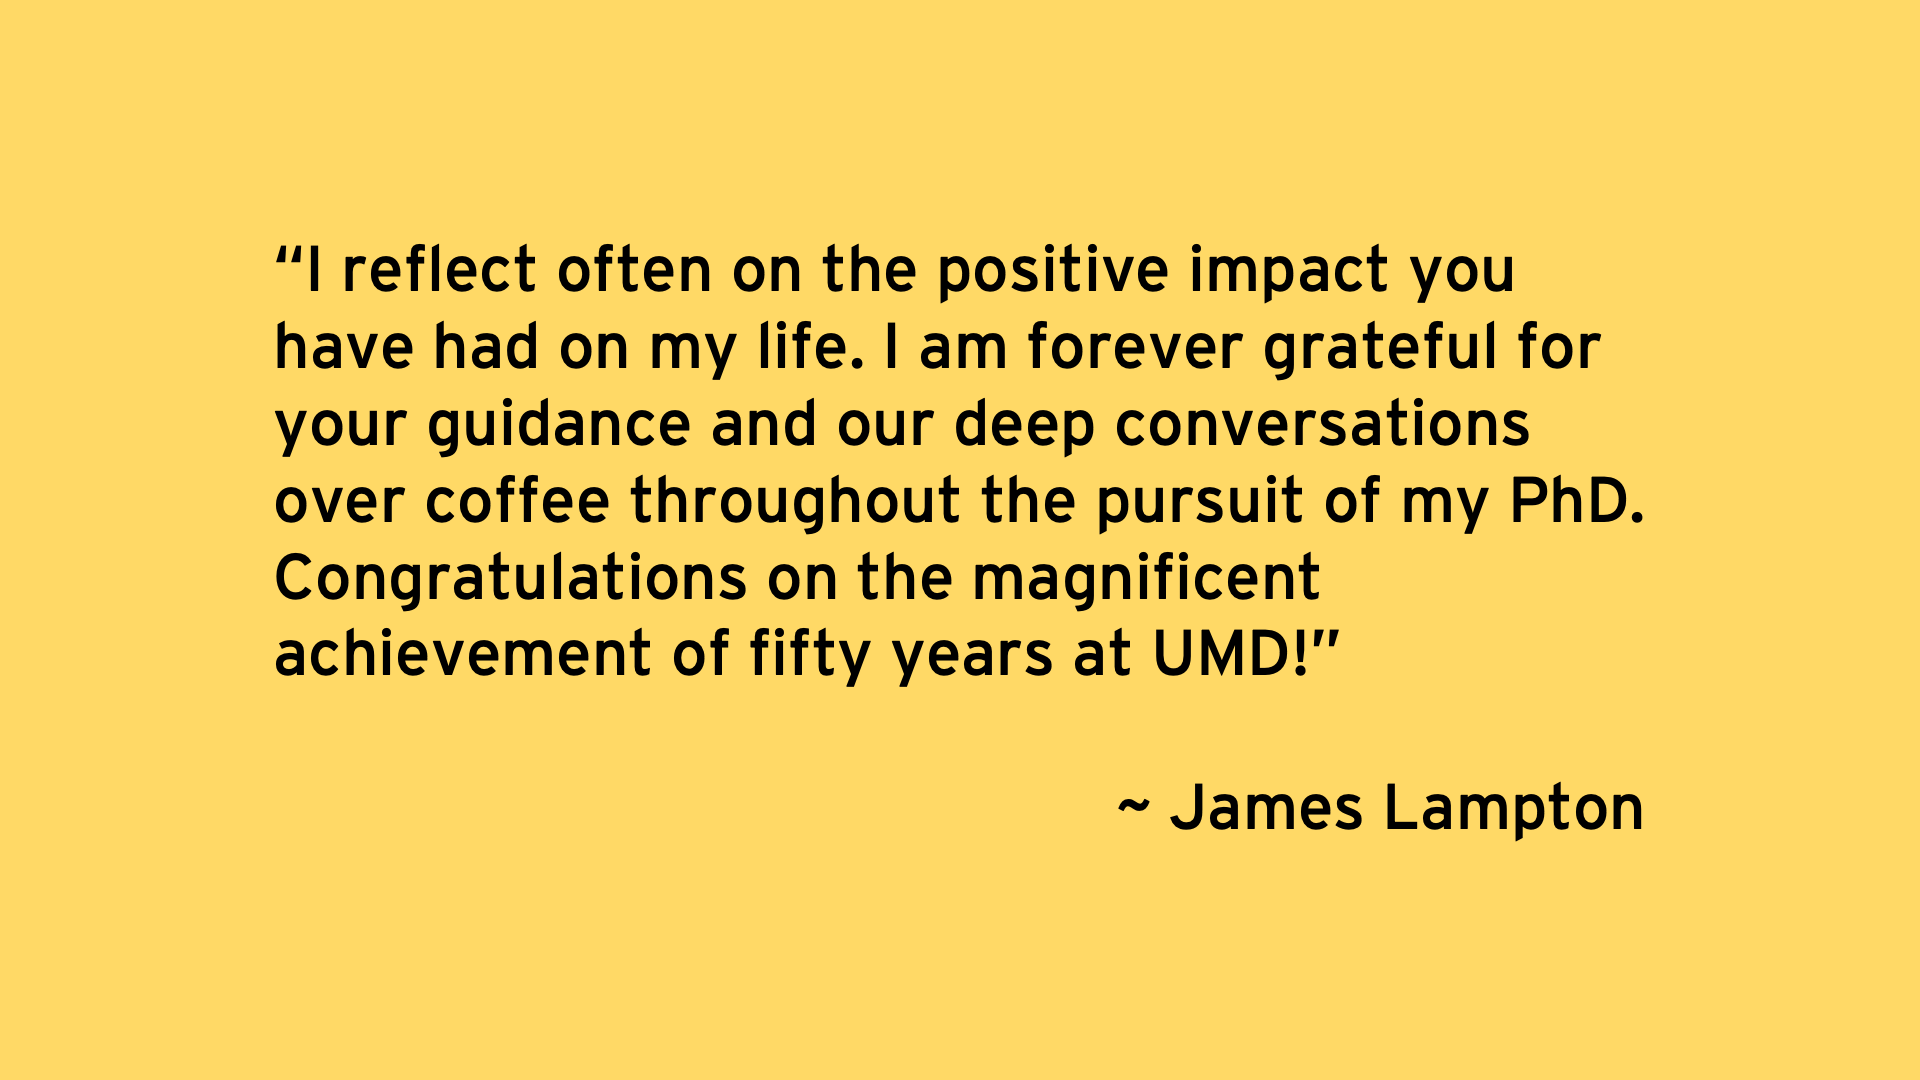 I reflect often on the positive impact you have had on my life. I am forever grateful for your guidance and our deep conversations over coffee throughout the pursuit of my PhD. Congratulations on the magnificent achievement of fifty years at UMD! - James Lampton